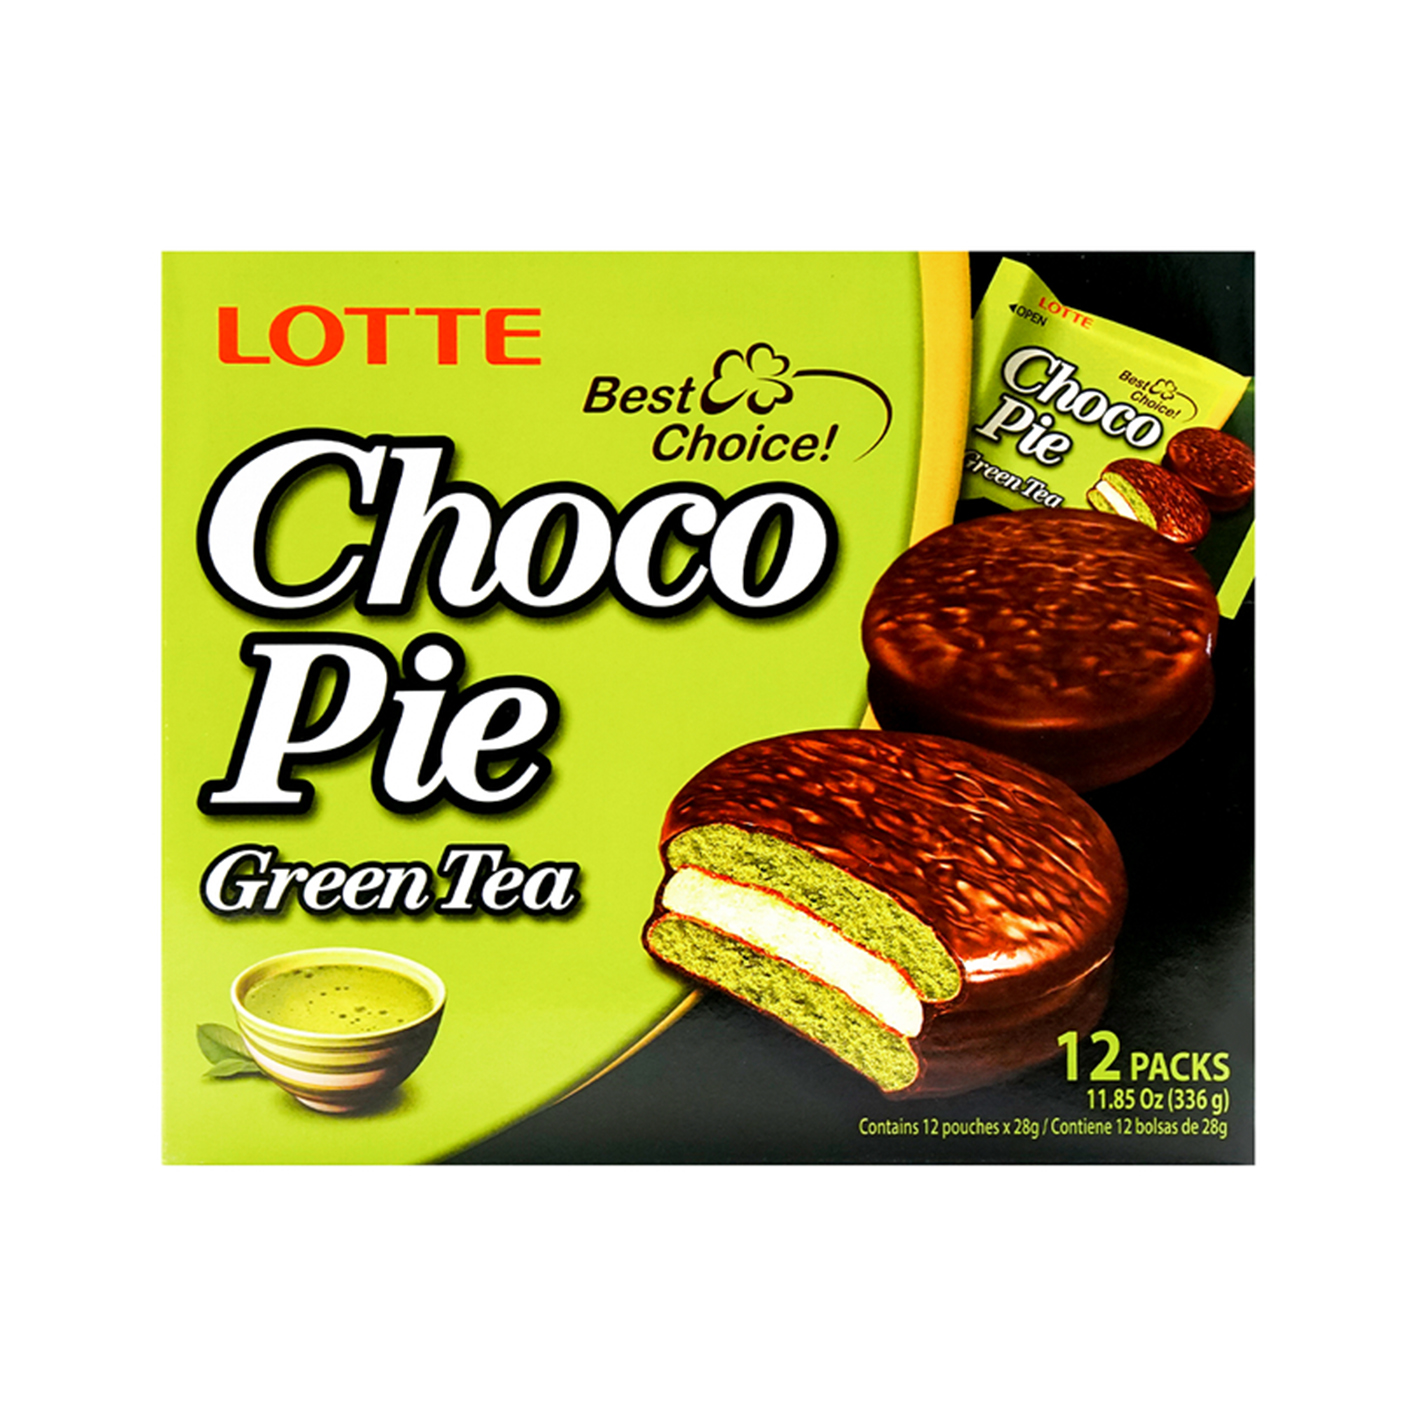 Lotte choco pie green tea 336g 12pcs-eBest-Biscuits,Snacks & Confectionery